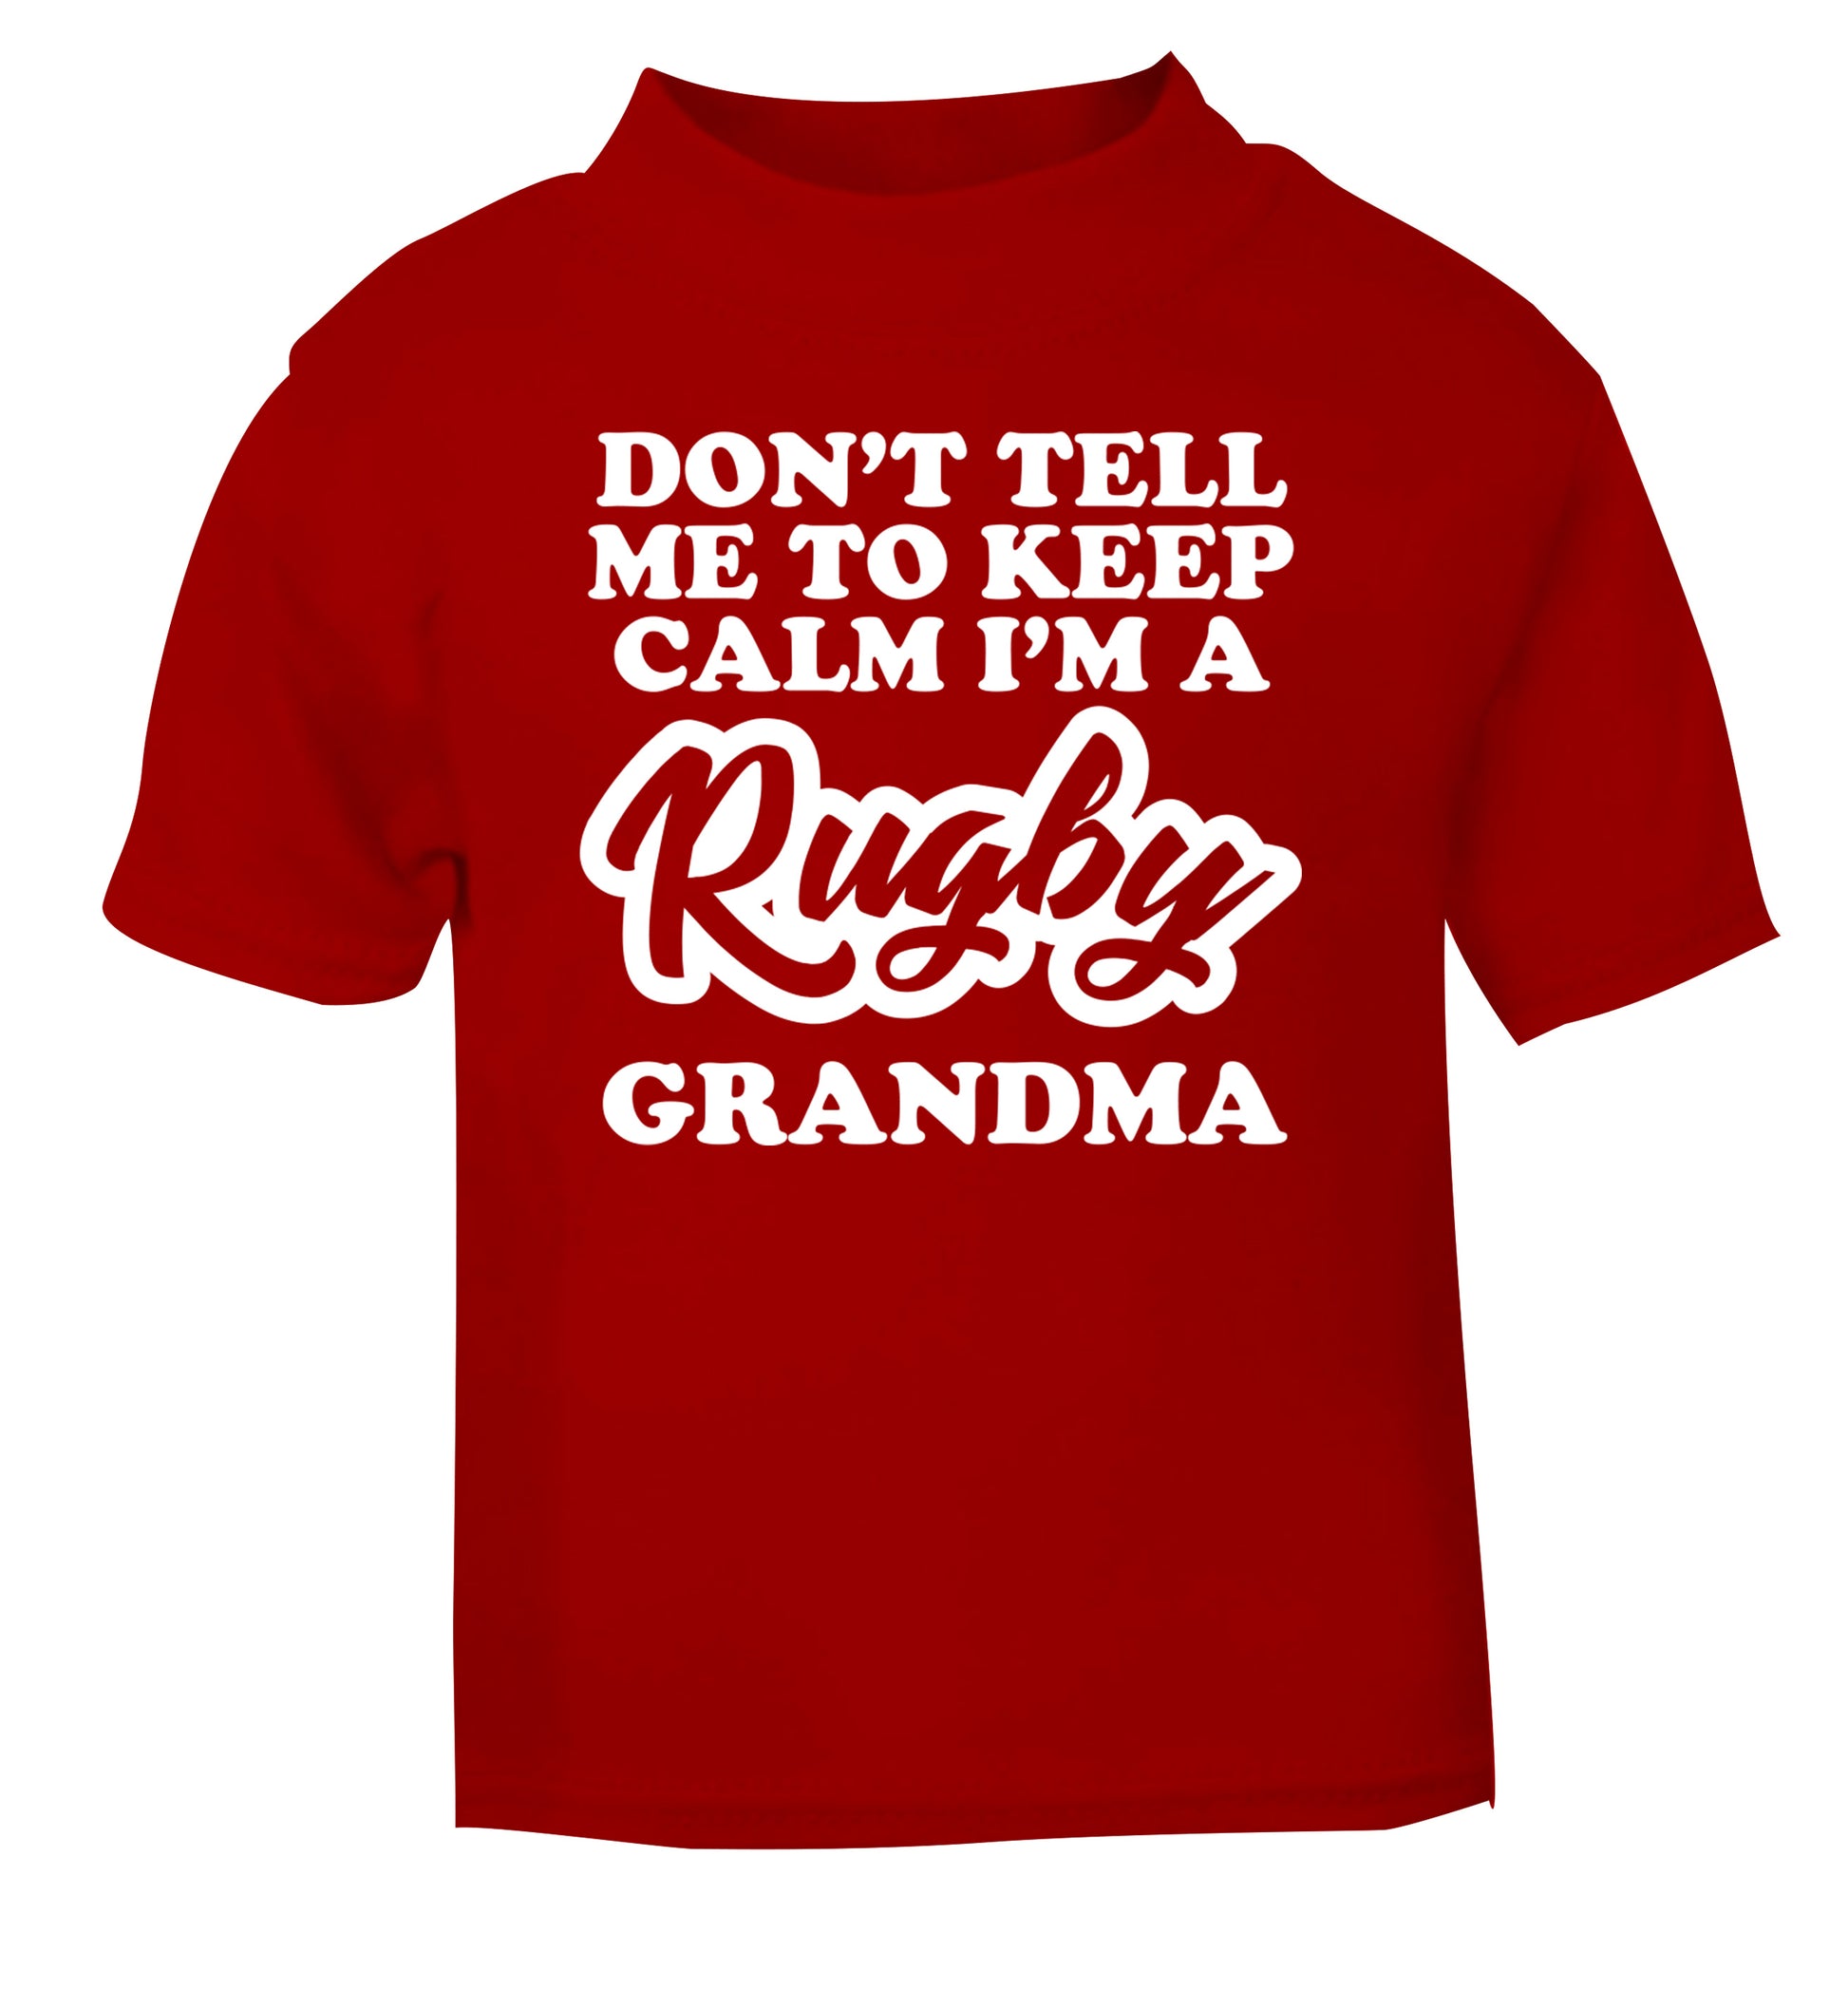 Don't tell me to keep calm I'm a rugby grandma red Baby Toddler Tshirt 2 Years